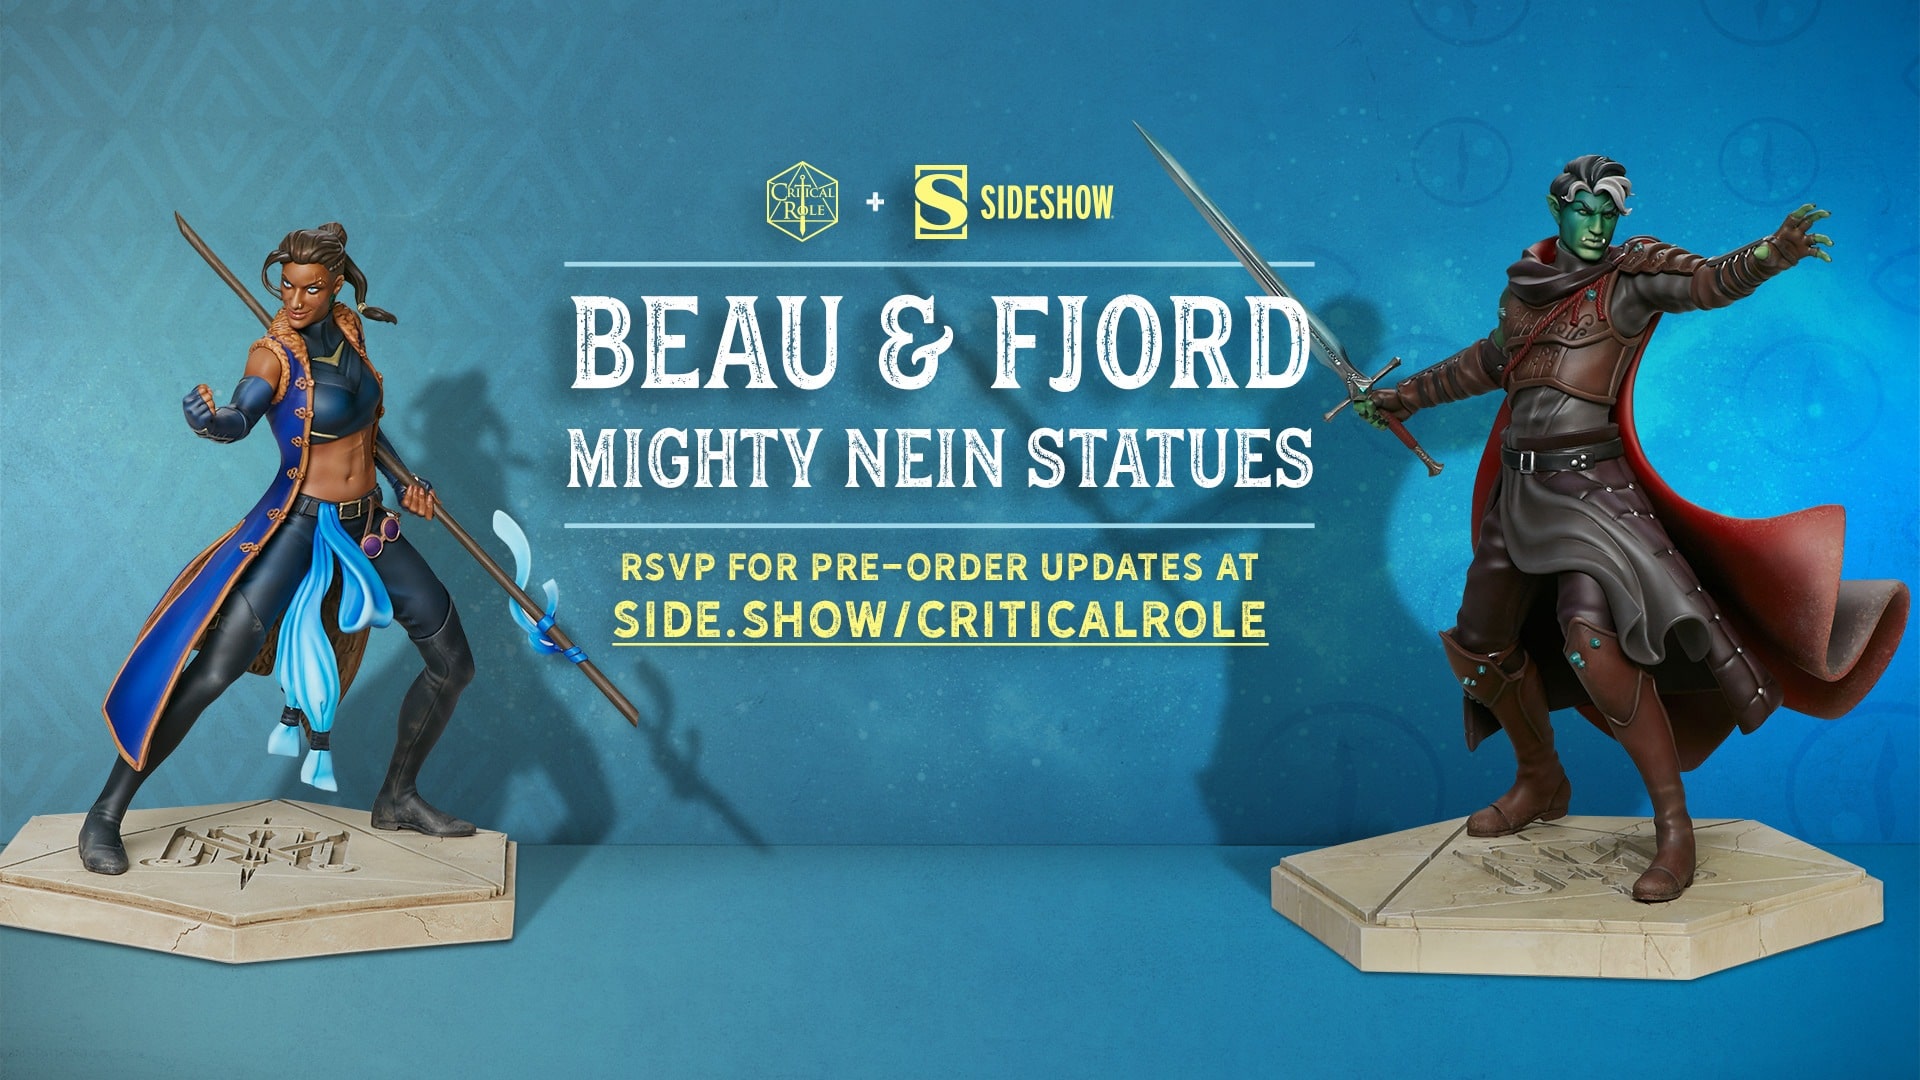 Critical Role Partners With Sideshow Collectibles And Reveals New Mighty Nein Art And Statues